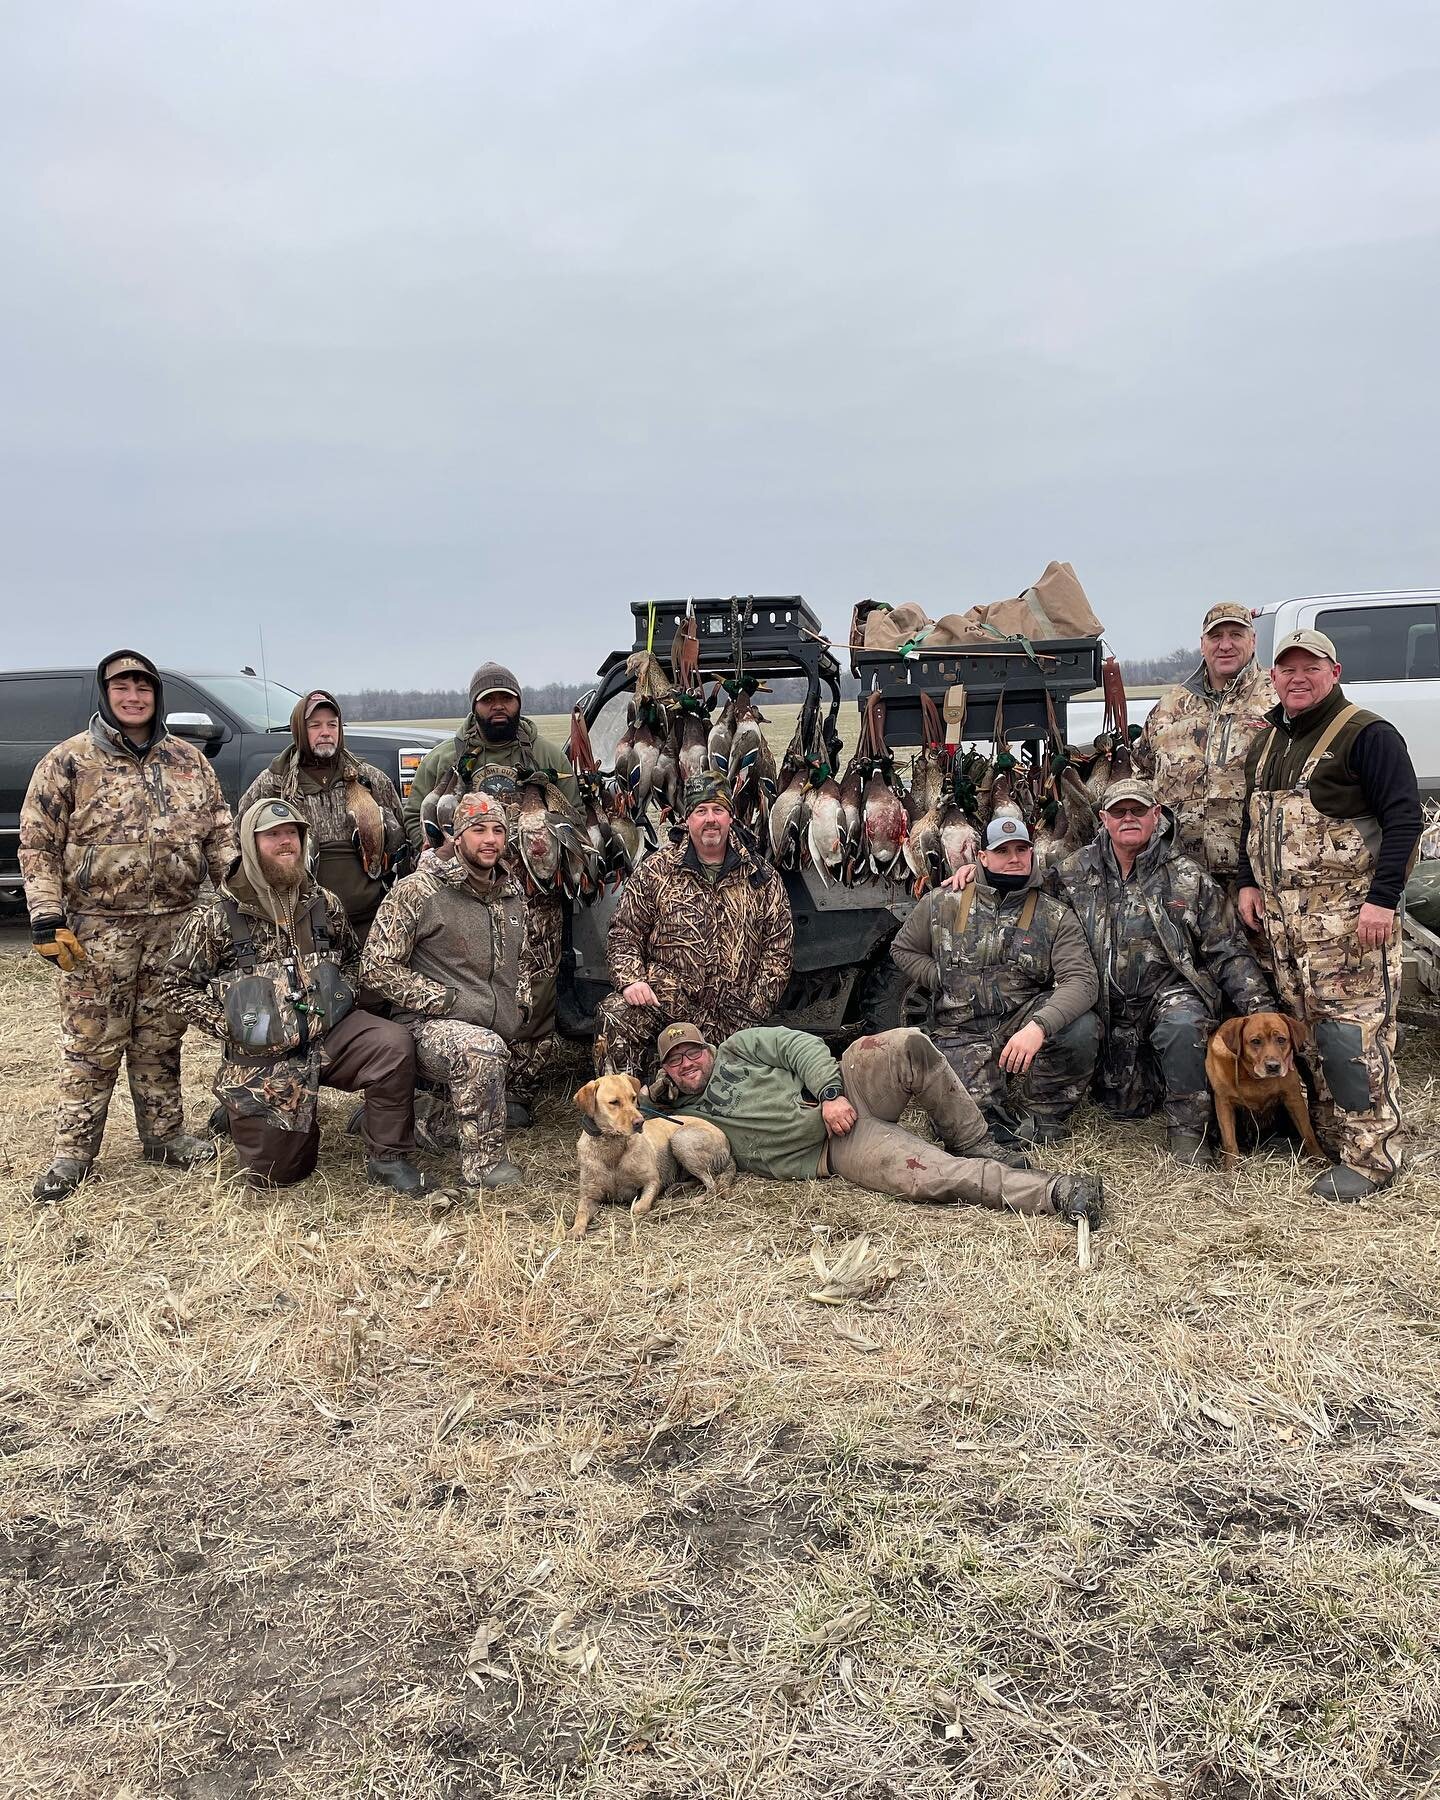 Our clients rave about our personalized, tailored approach and the exceptional level of service they receive. As one satisfied client put it, 'I've been on many hunting trips, but my experience with TKO was unparalleled. The attention to detail and l